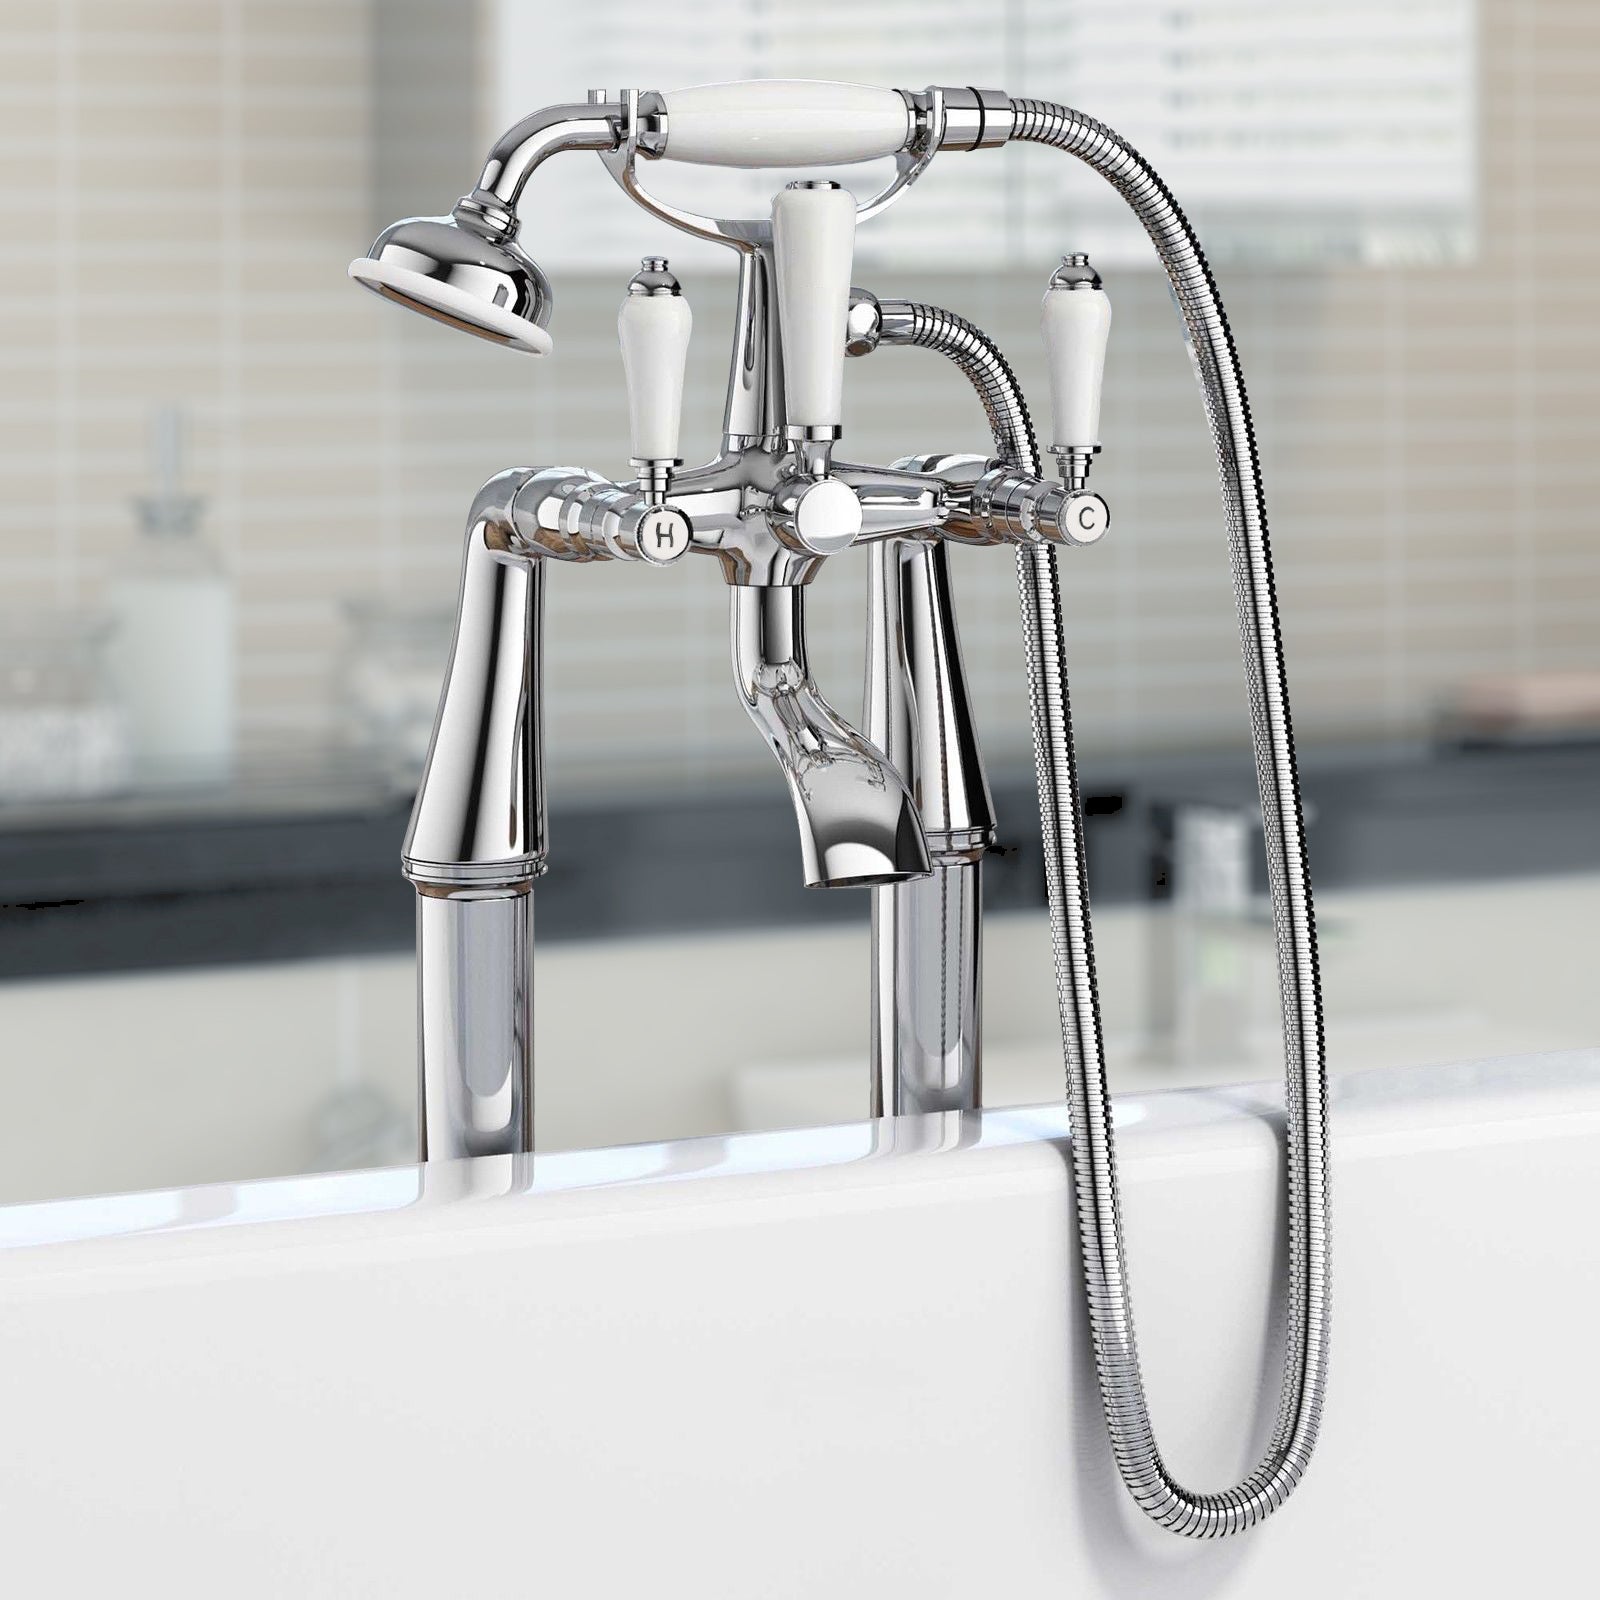 Imperior Traditional Design Freestanding Bath Shower Mixer Tap With Handheld Kit